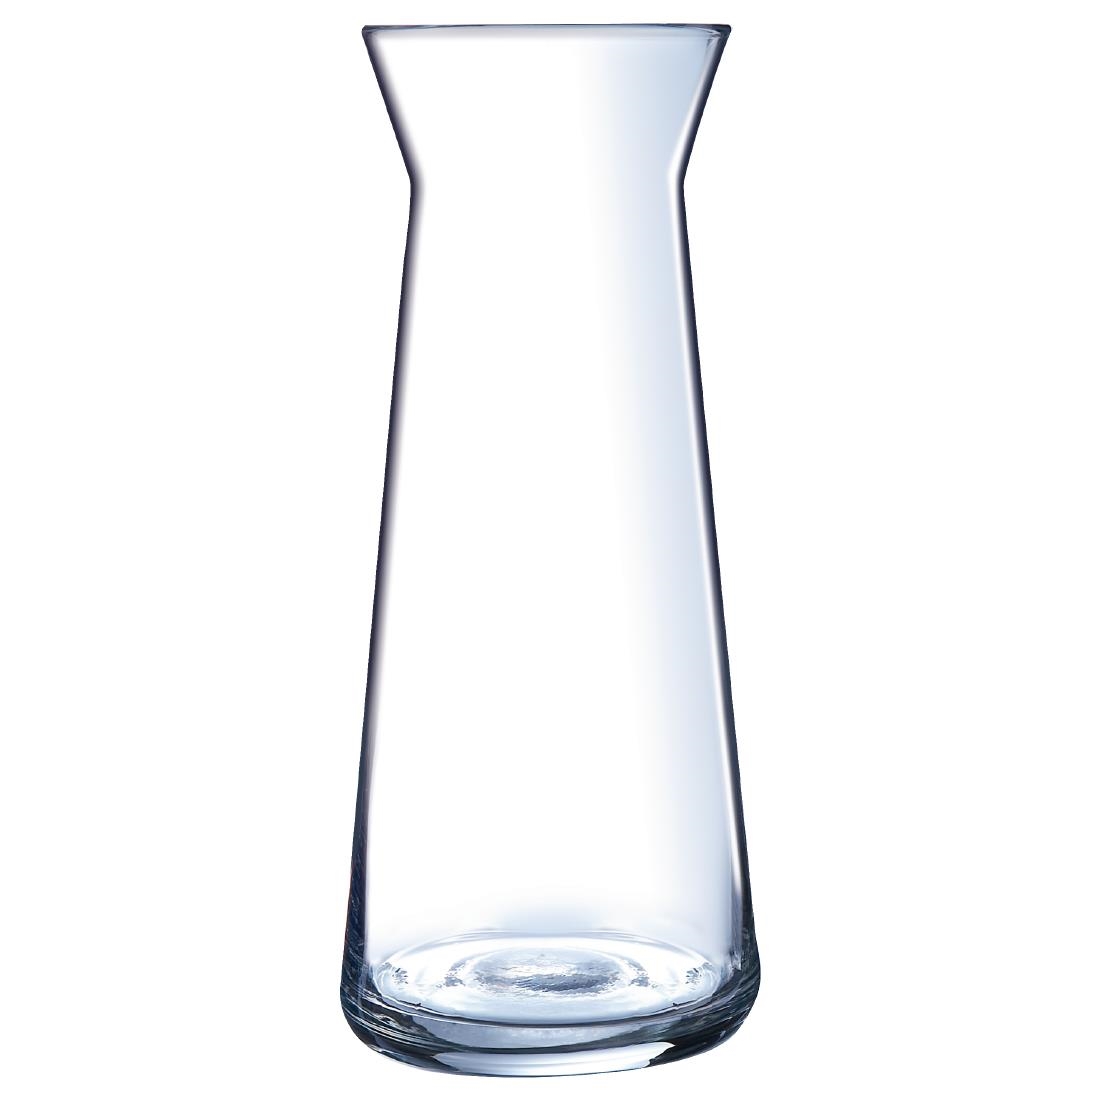 Arcoroc Cascade Carafes 750ml (Pack of 6)